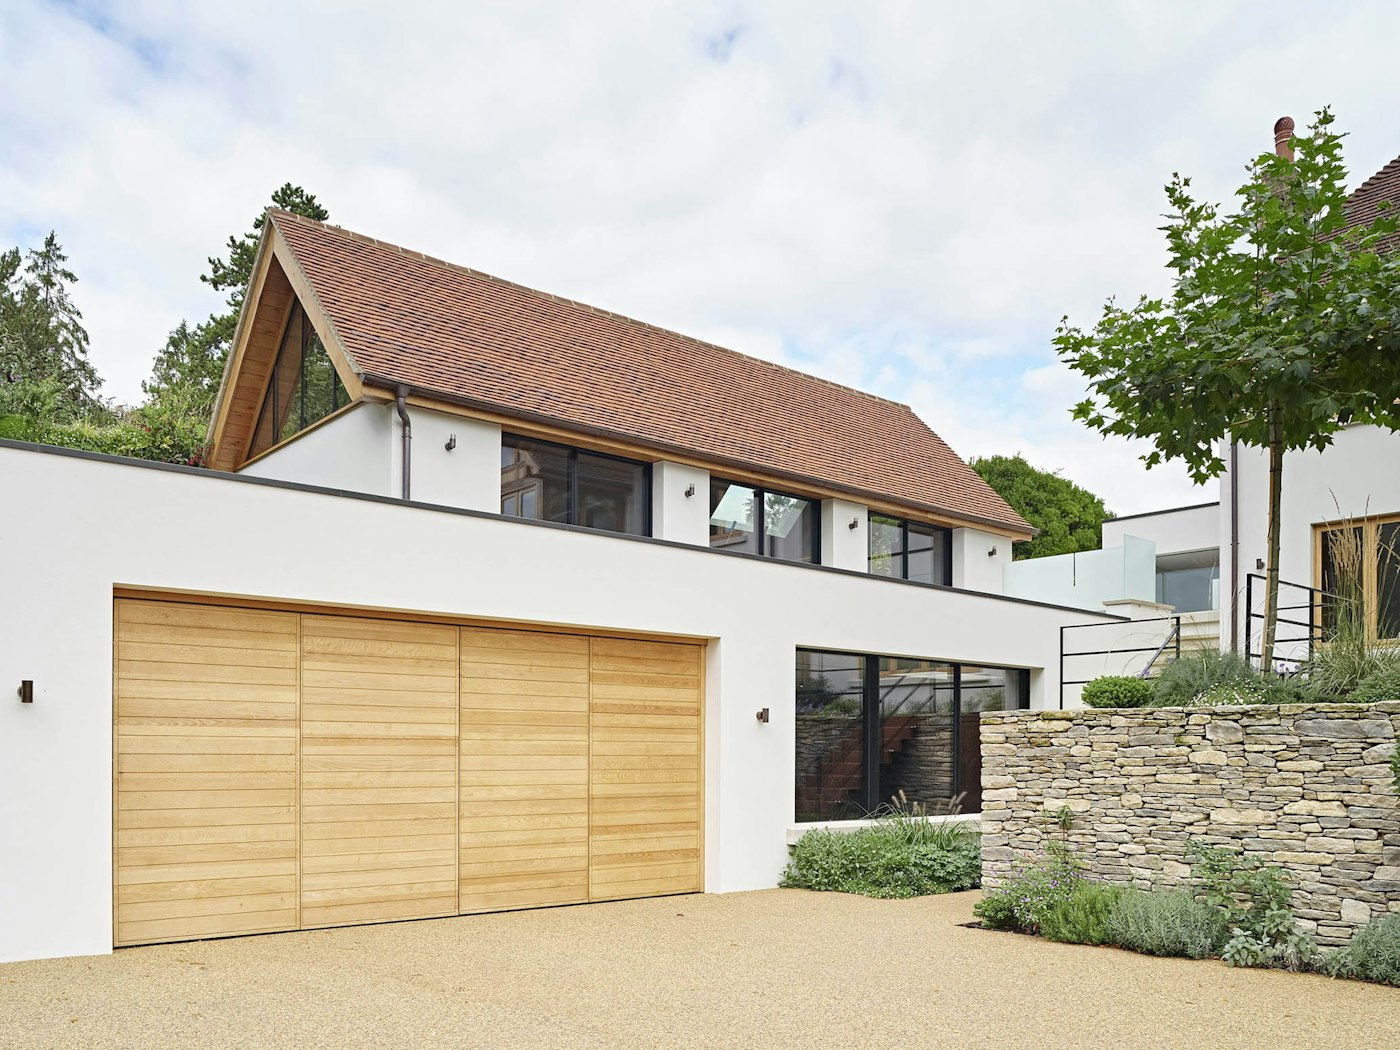 Across the drive, our Parma double bi-fold garage doors stand at 5400mm wide